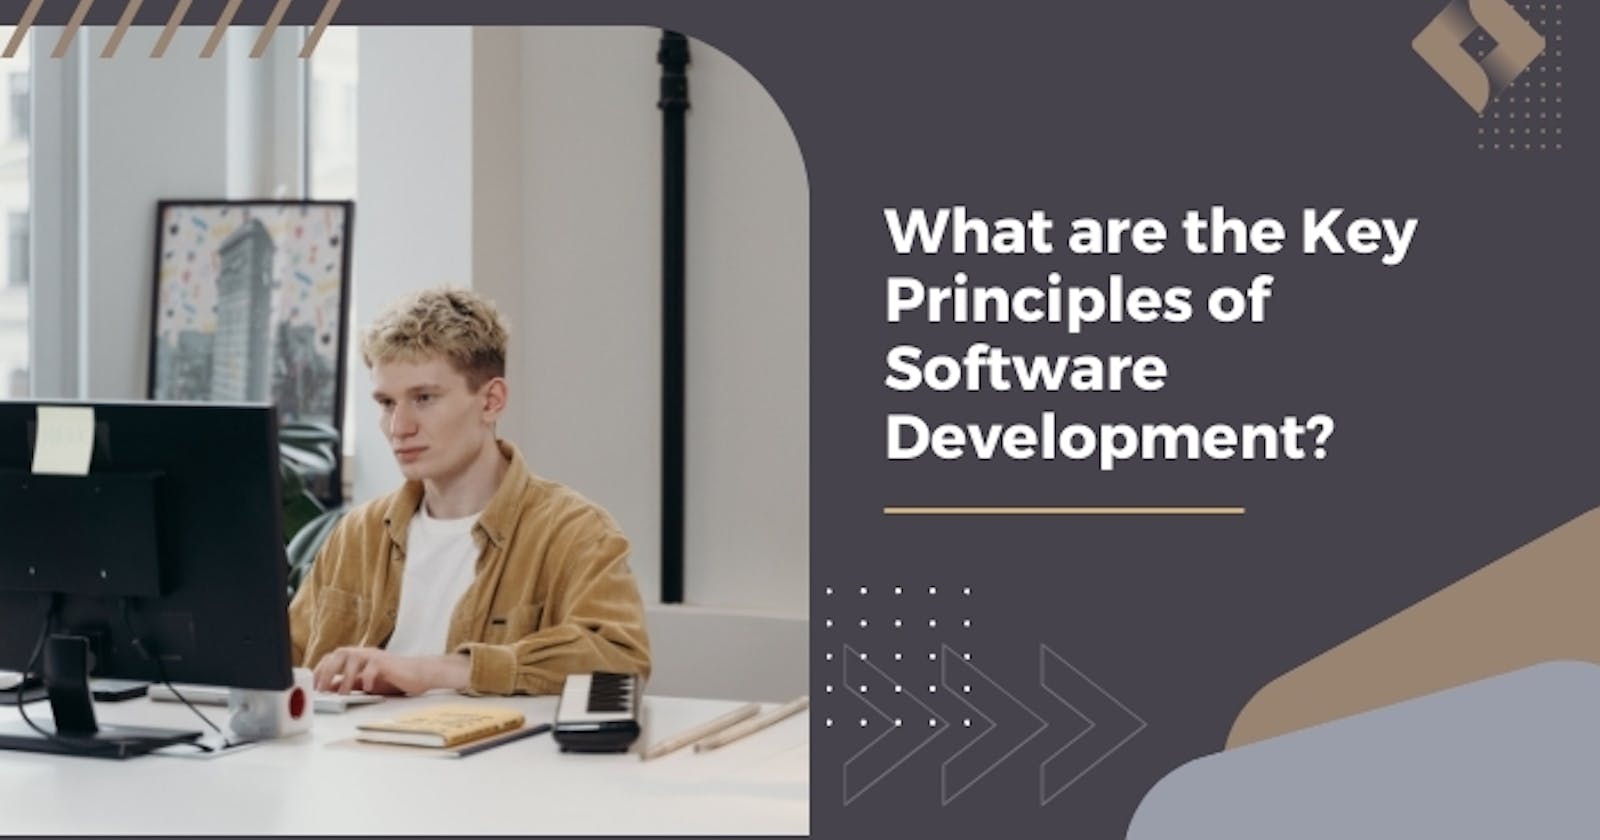 What are the Key Principles of Software Development?